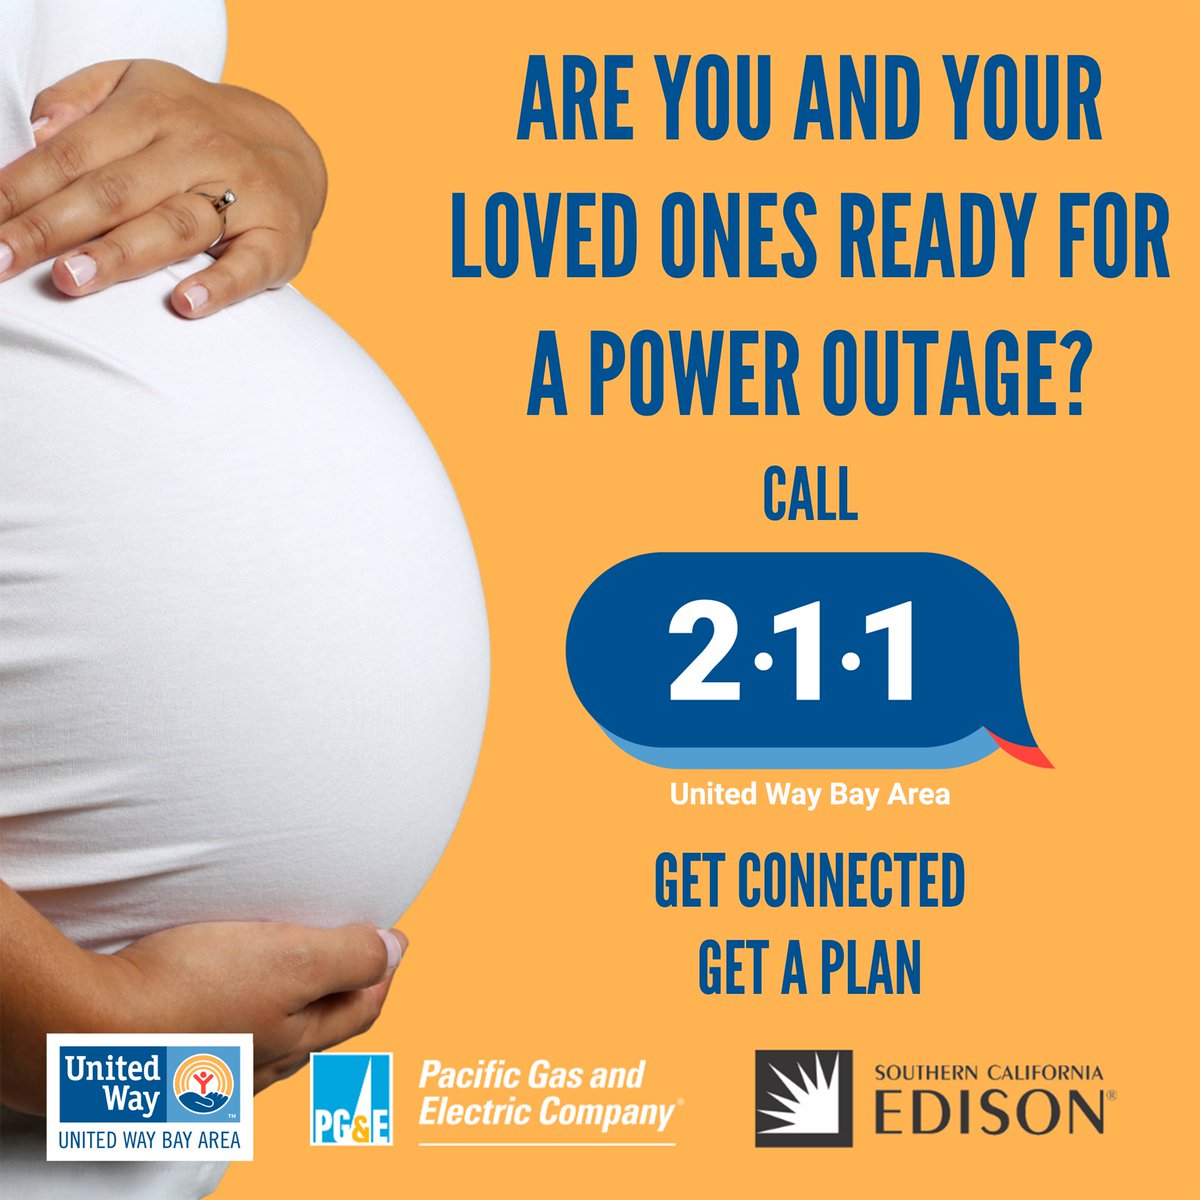 A power outage could create unpredictable outcomes regarding our health. Call 211 to get a power outage plan set up!